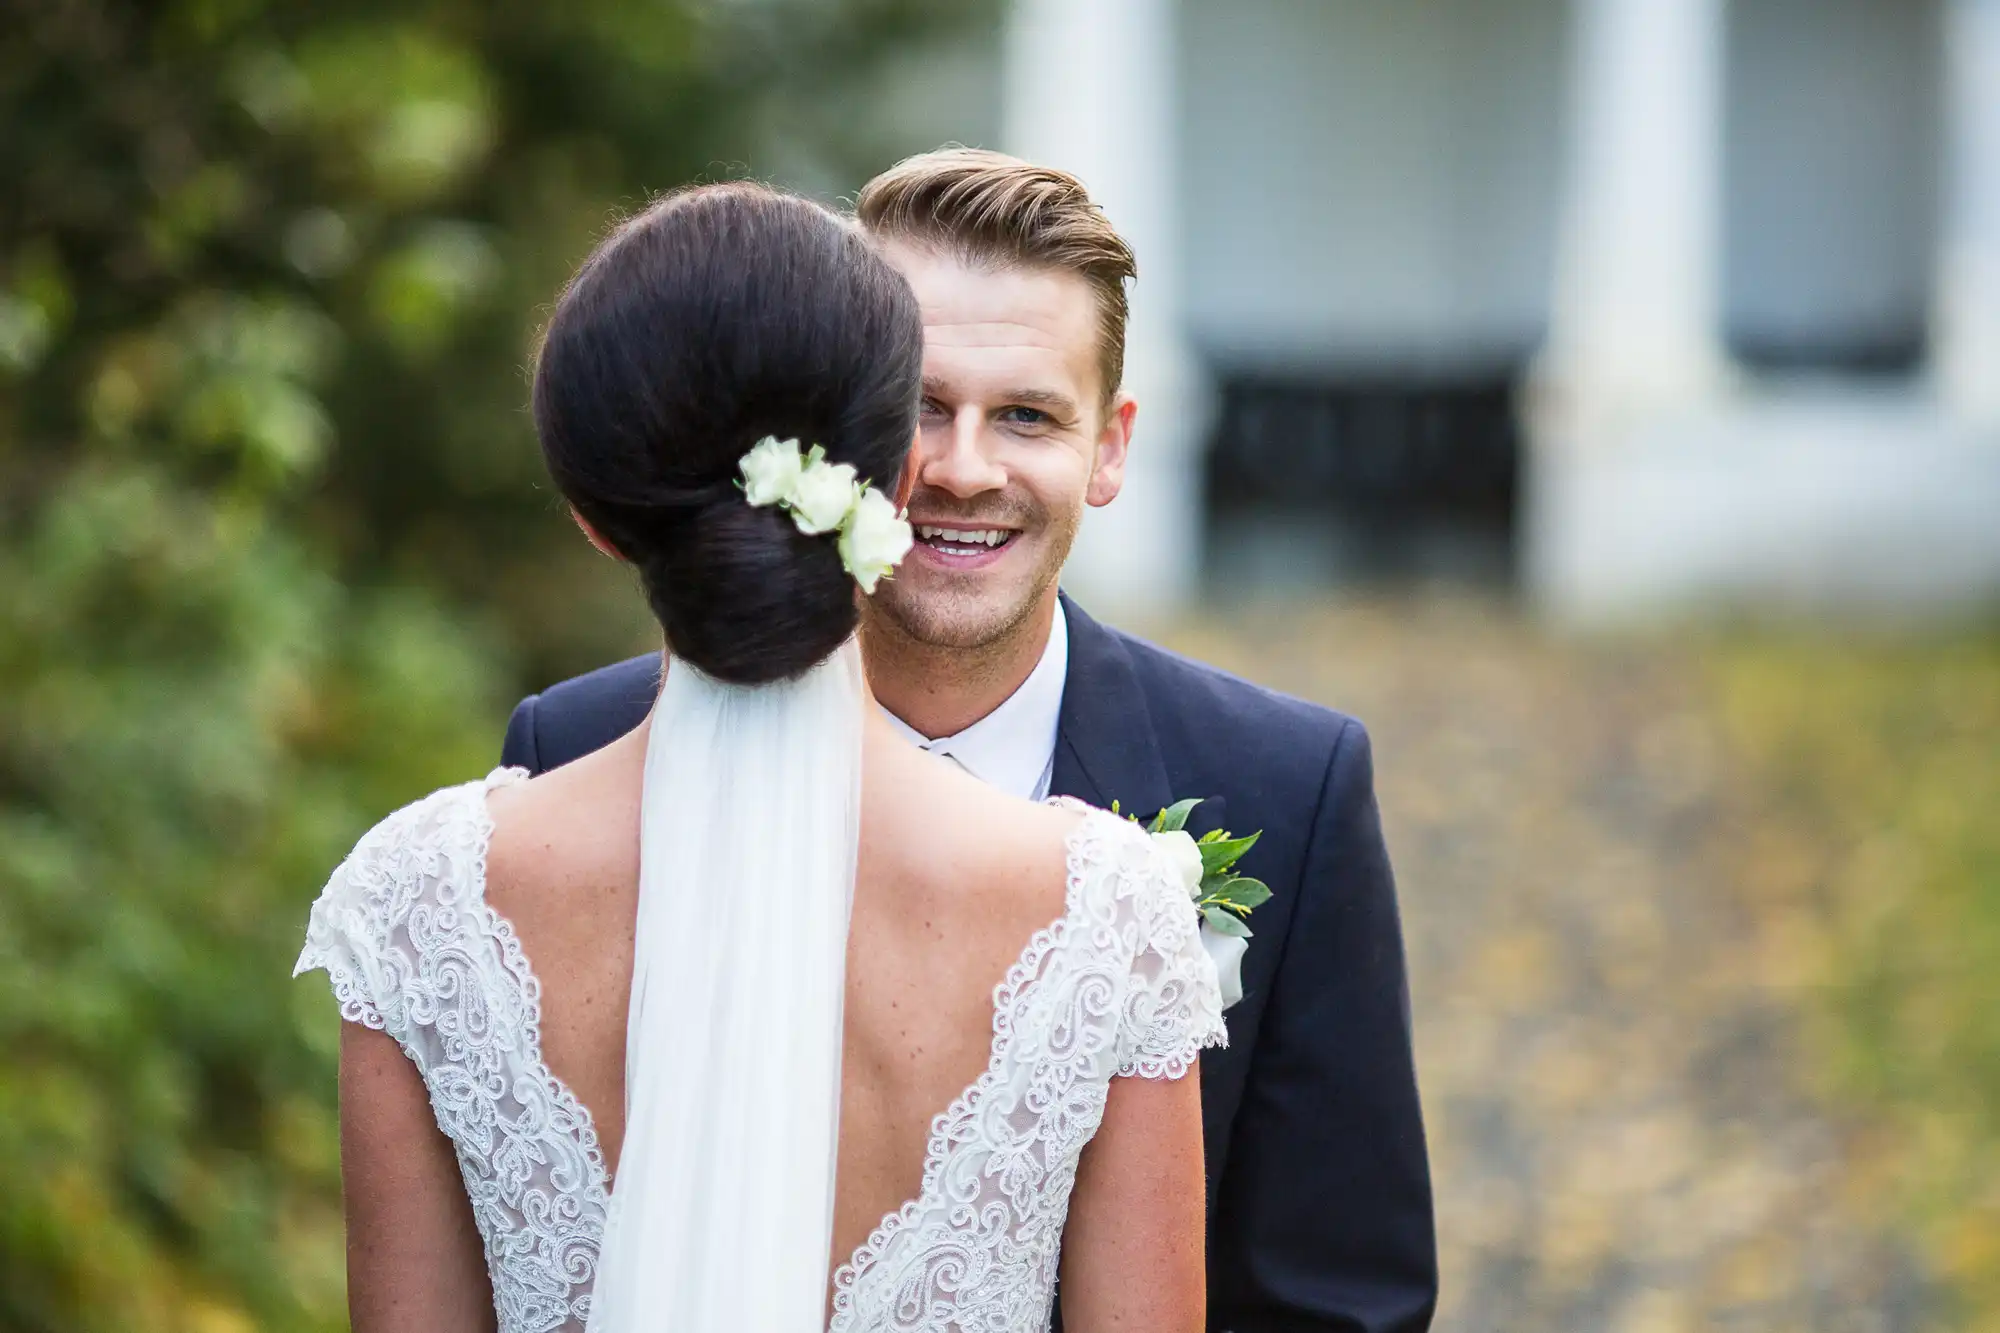 A groom smiling at the camera over the shoulder of a bride with her back facing us, featuring a lace wedding dress and white floral hair accessory.